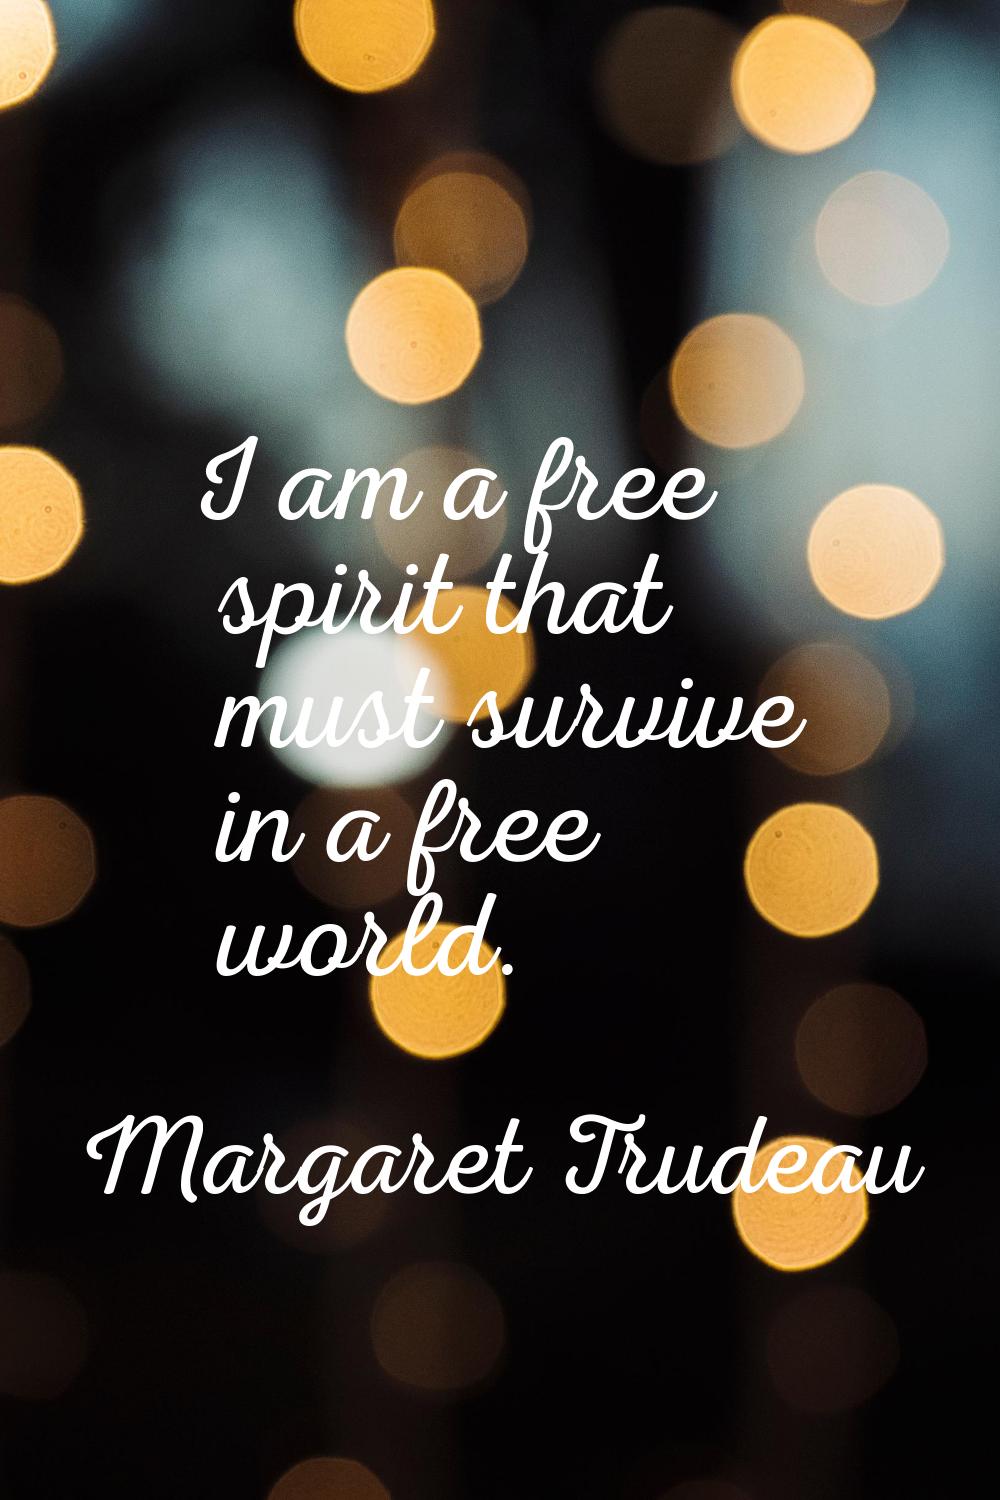 I am a free spirit that must survive in a free world.